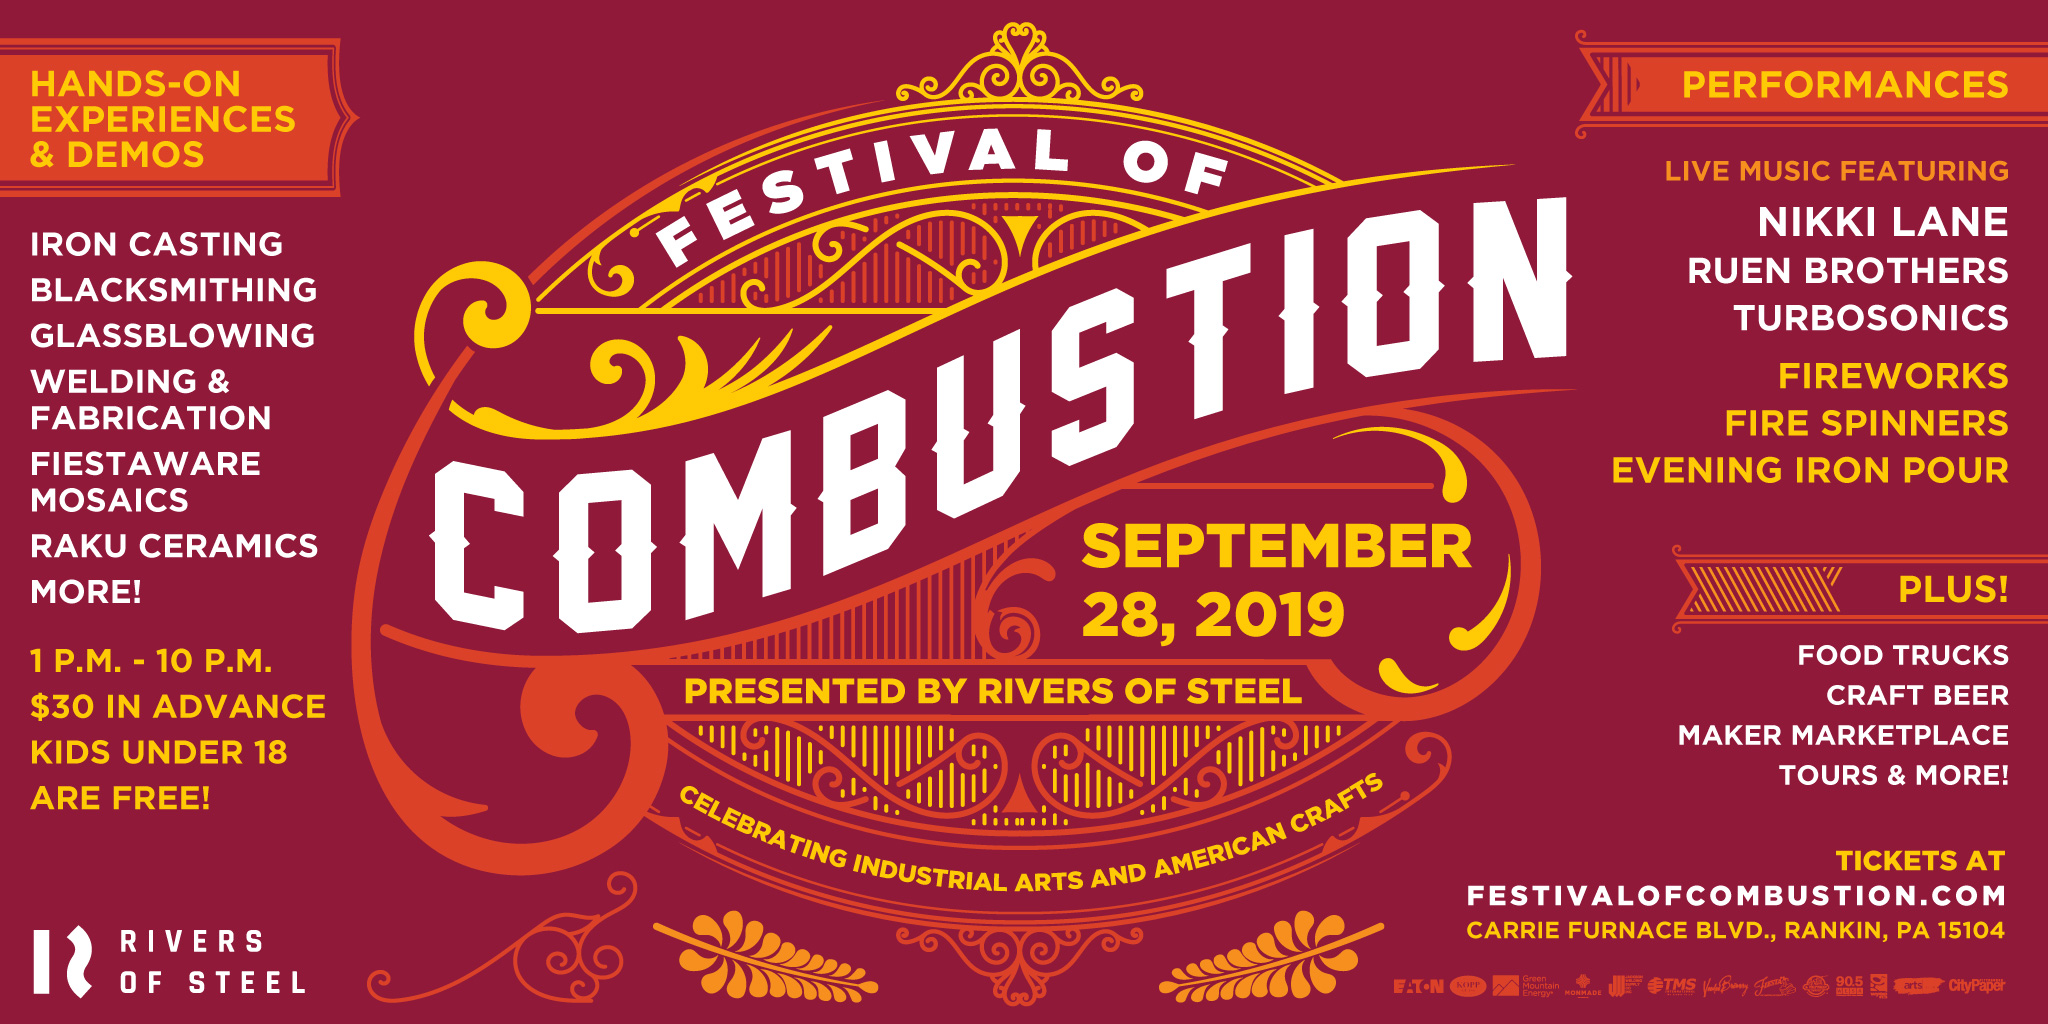 Fifth Annual Festival of Combustion — Rivers of Steel